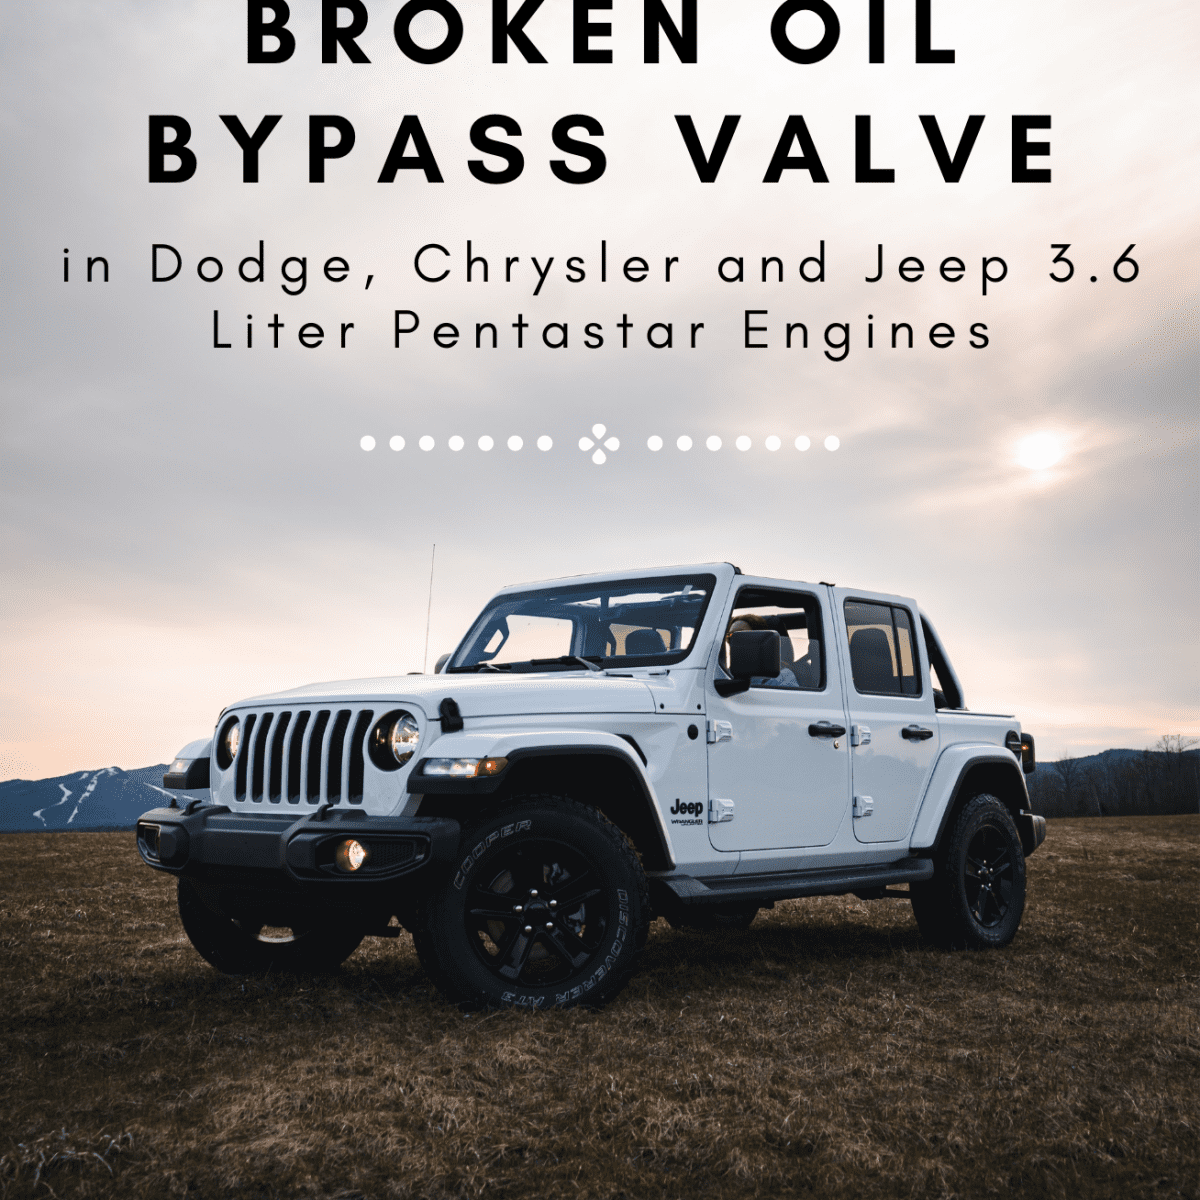 Replacing a Broken Oil Bypass Valve in Dodge, Chrysler and Jeep  Liter  Pentastar Engines - AxleAddict